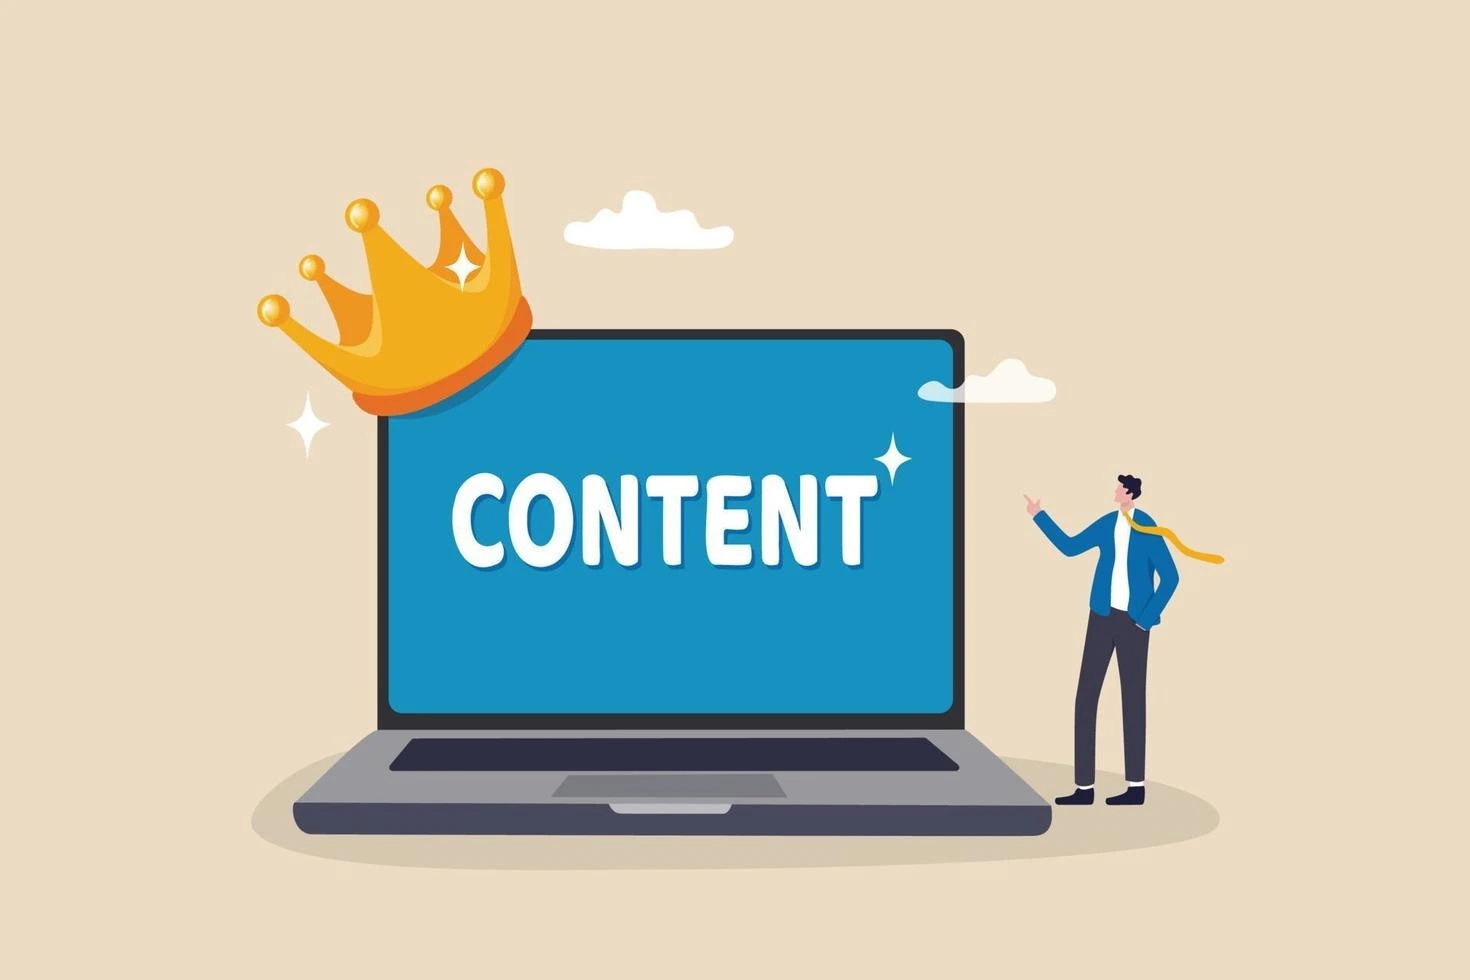 Illustration of a large laptop with the word CONTENT on the screen, topped with a golden crown. Next to the laptop stands a small figure of a person gesturing towards the screen, implying the importance of content.